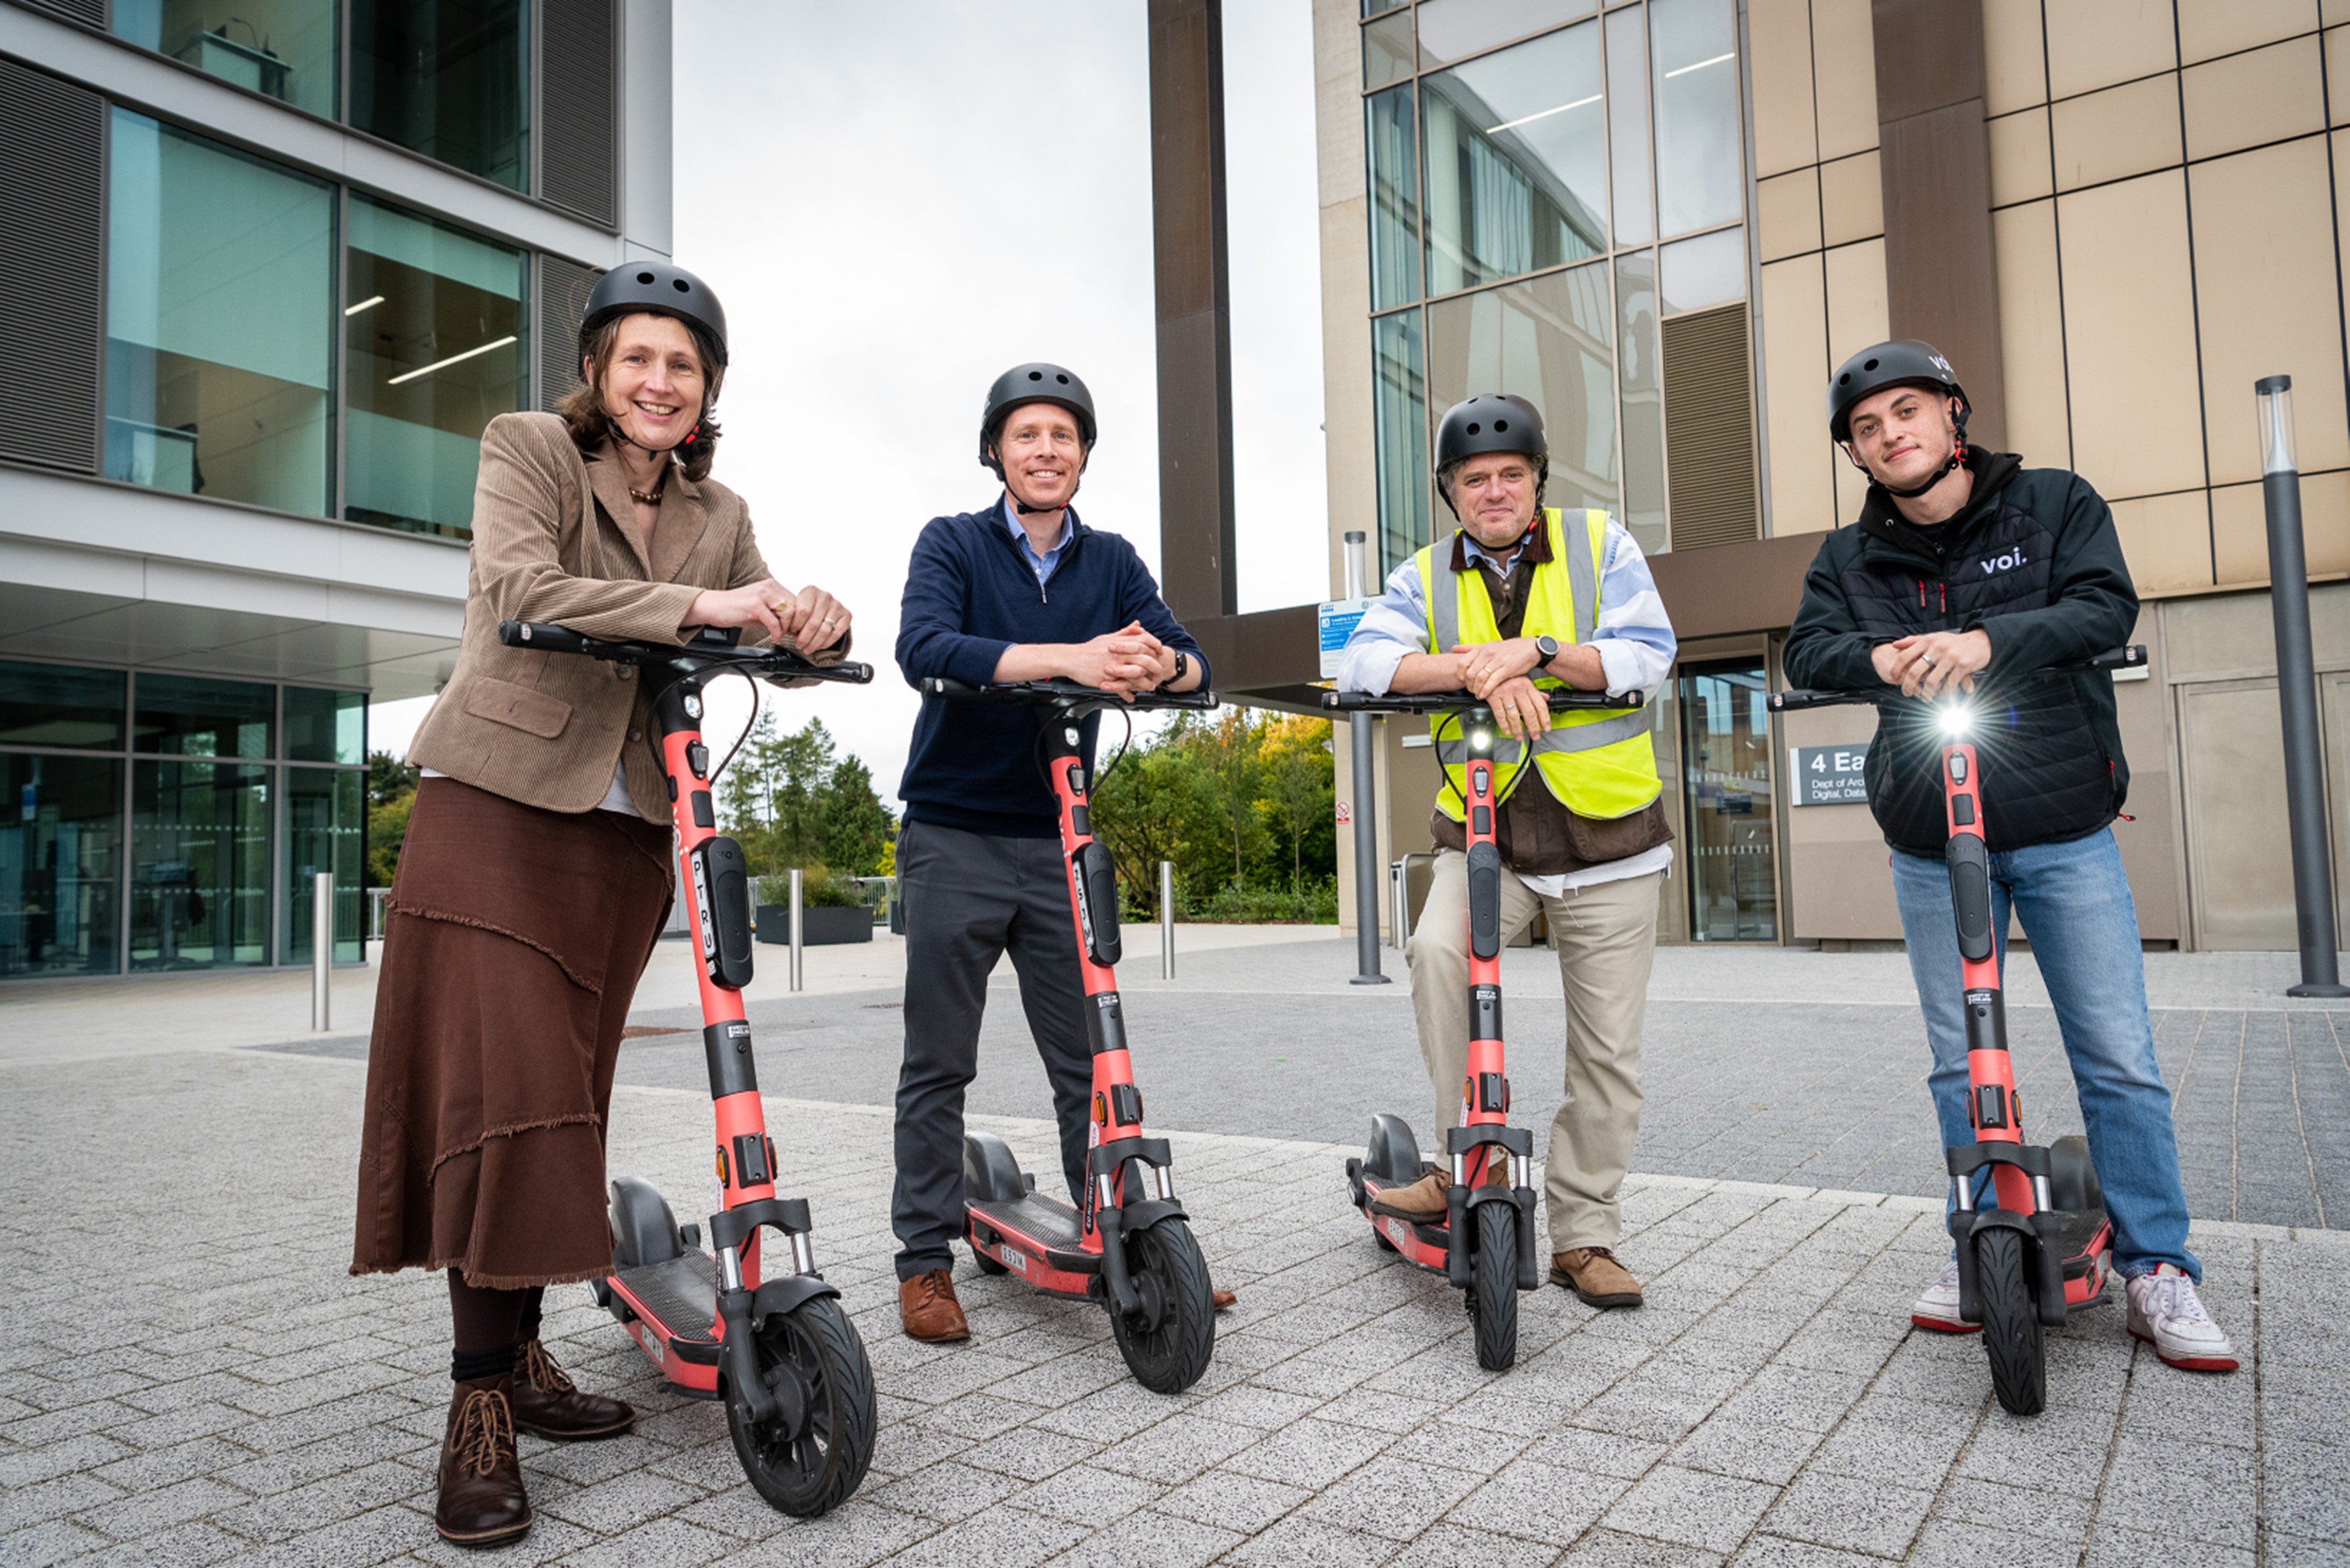 Councillor Sarah Warren, Ian Blenkharn, Councillor Matt McCabe and Alfie Marsh standing with e-scooters at the University of Bath’s Claverton Down campus